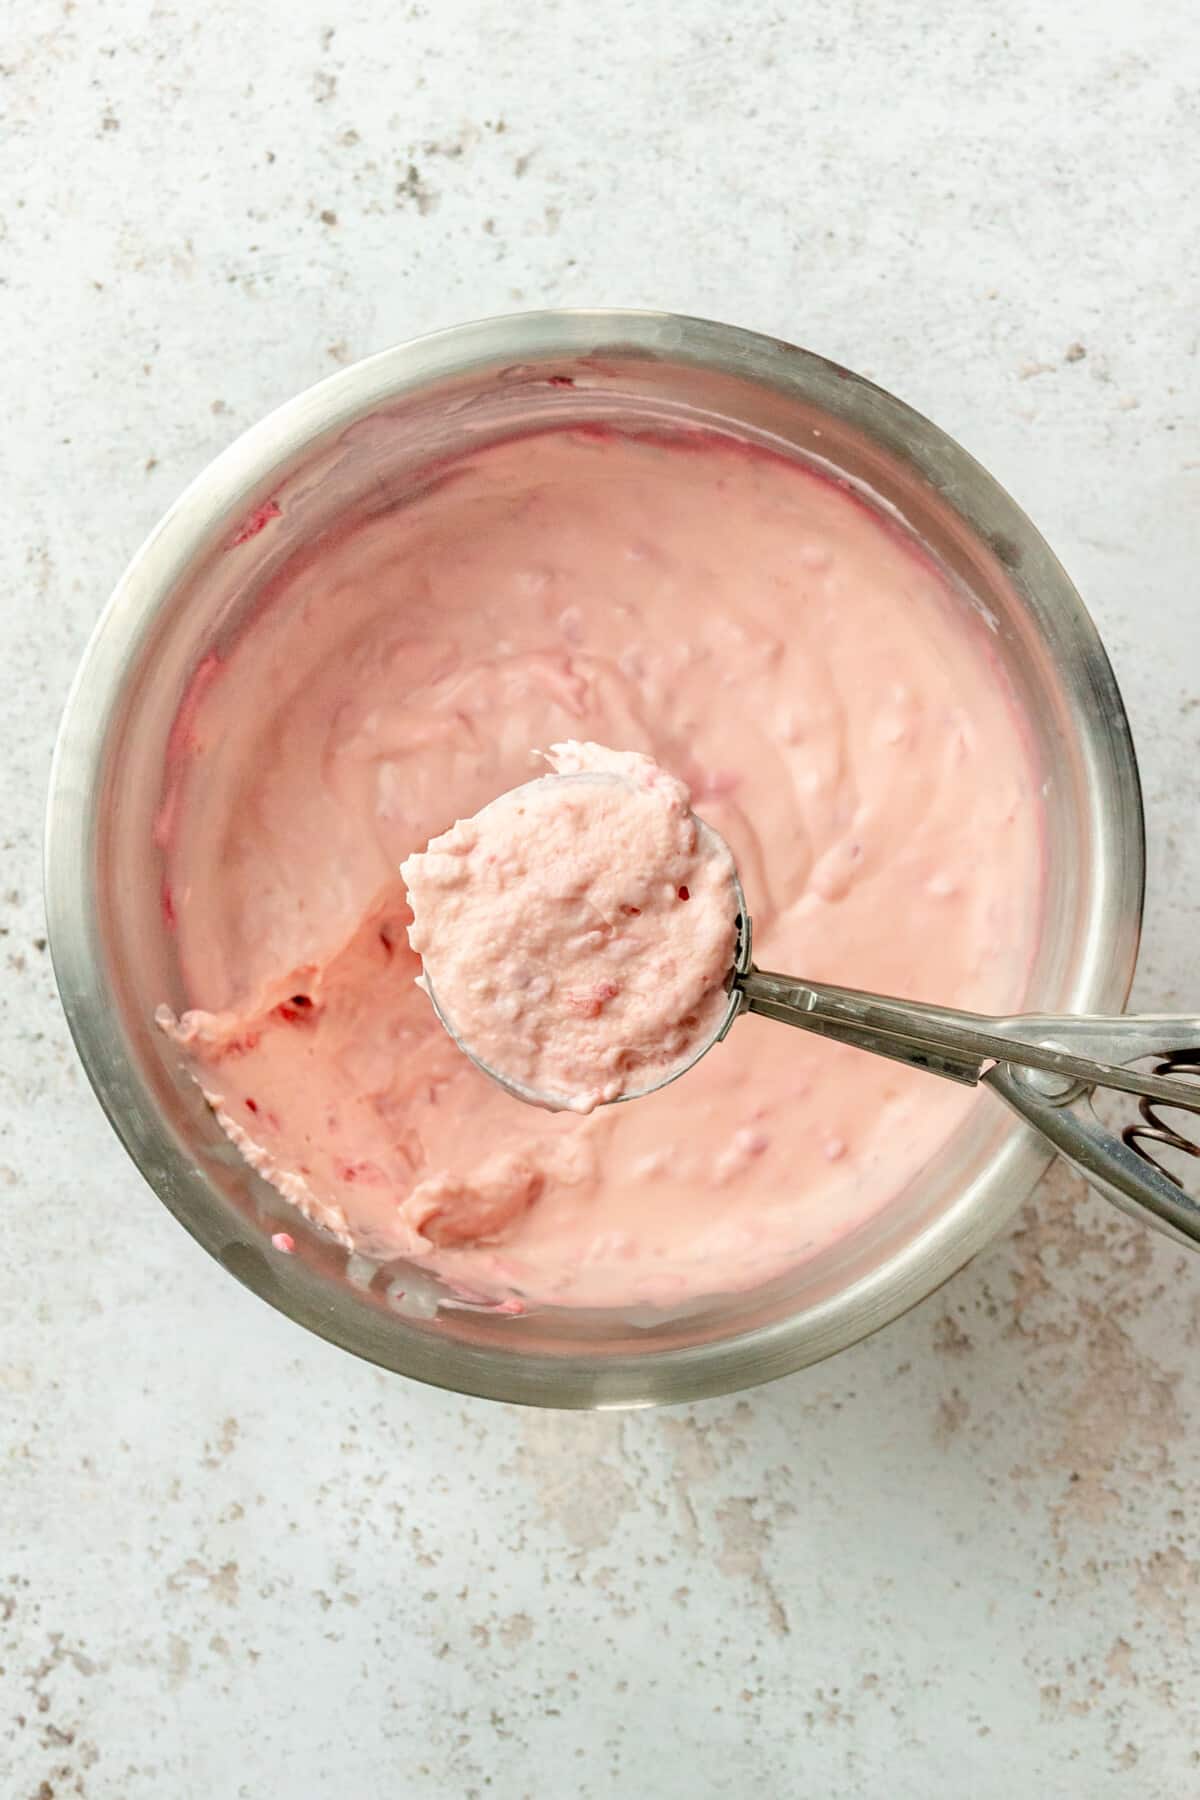 A small ice cream scoops up a chilled portion of the white chocolate raspberry cheesecake fat bombs from a stainless steel bowl on a light grey colored surface.